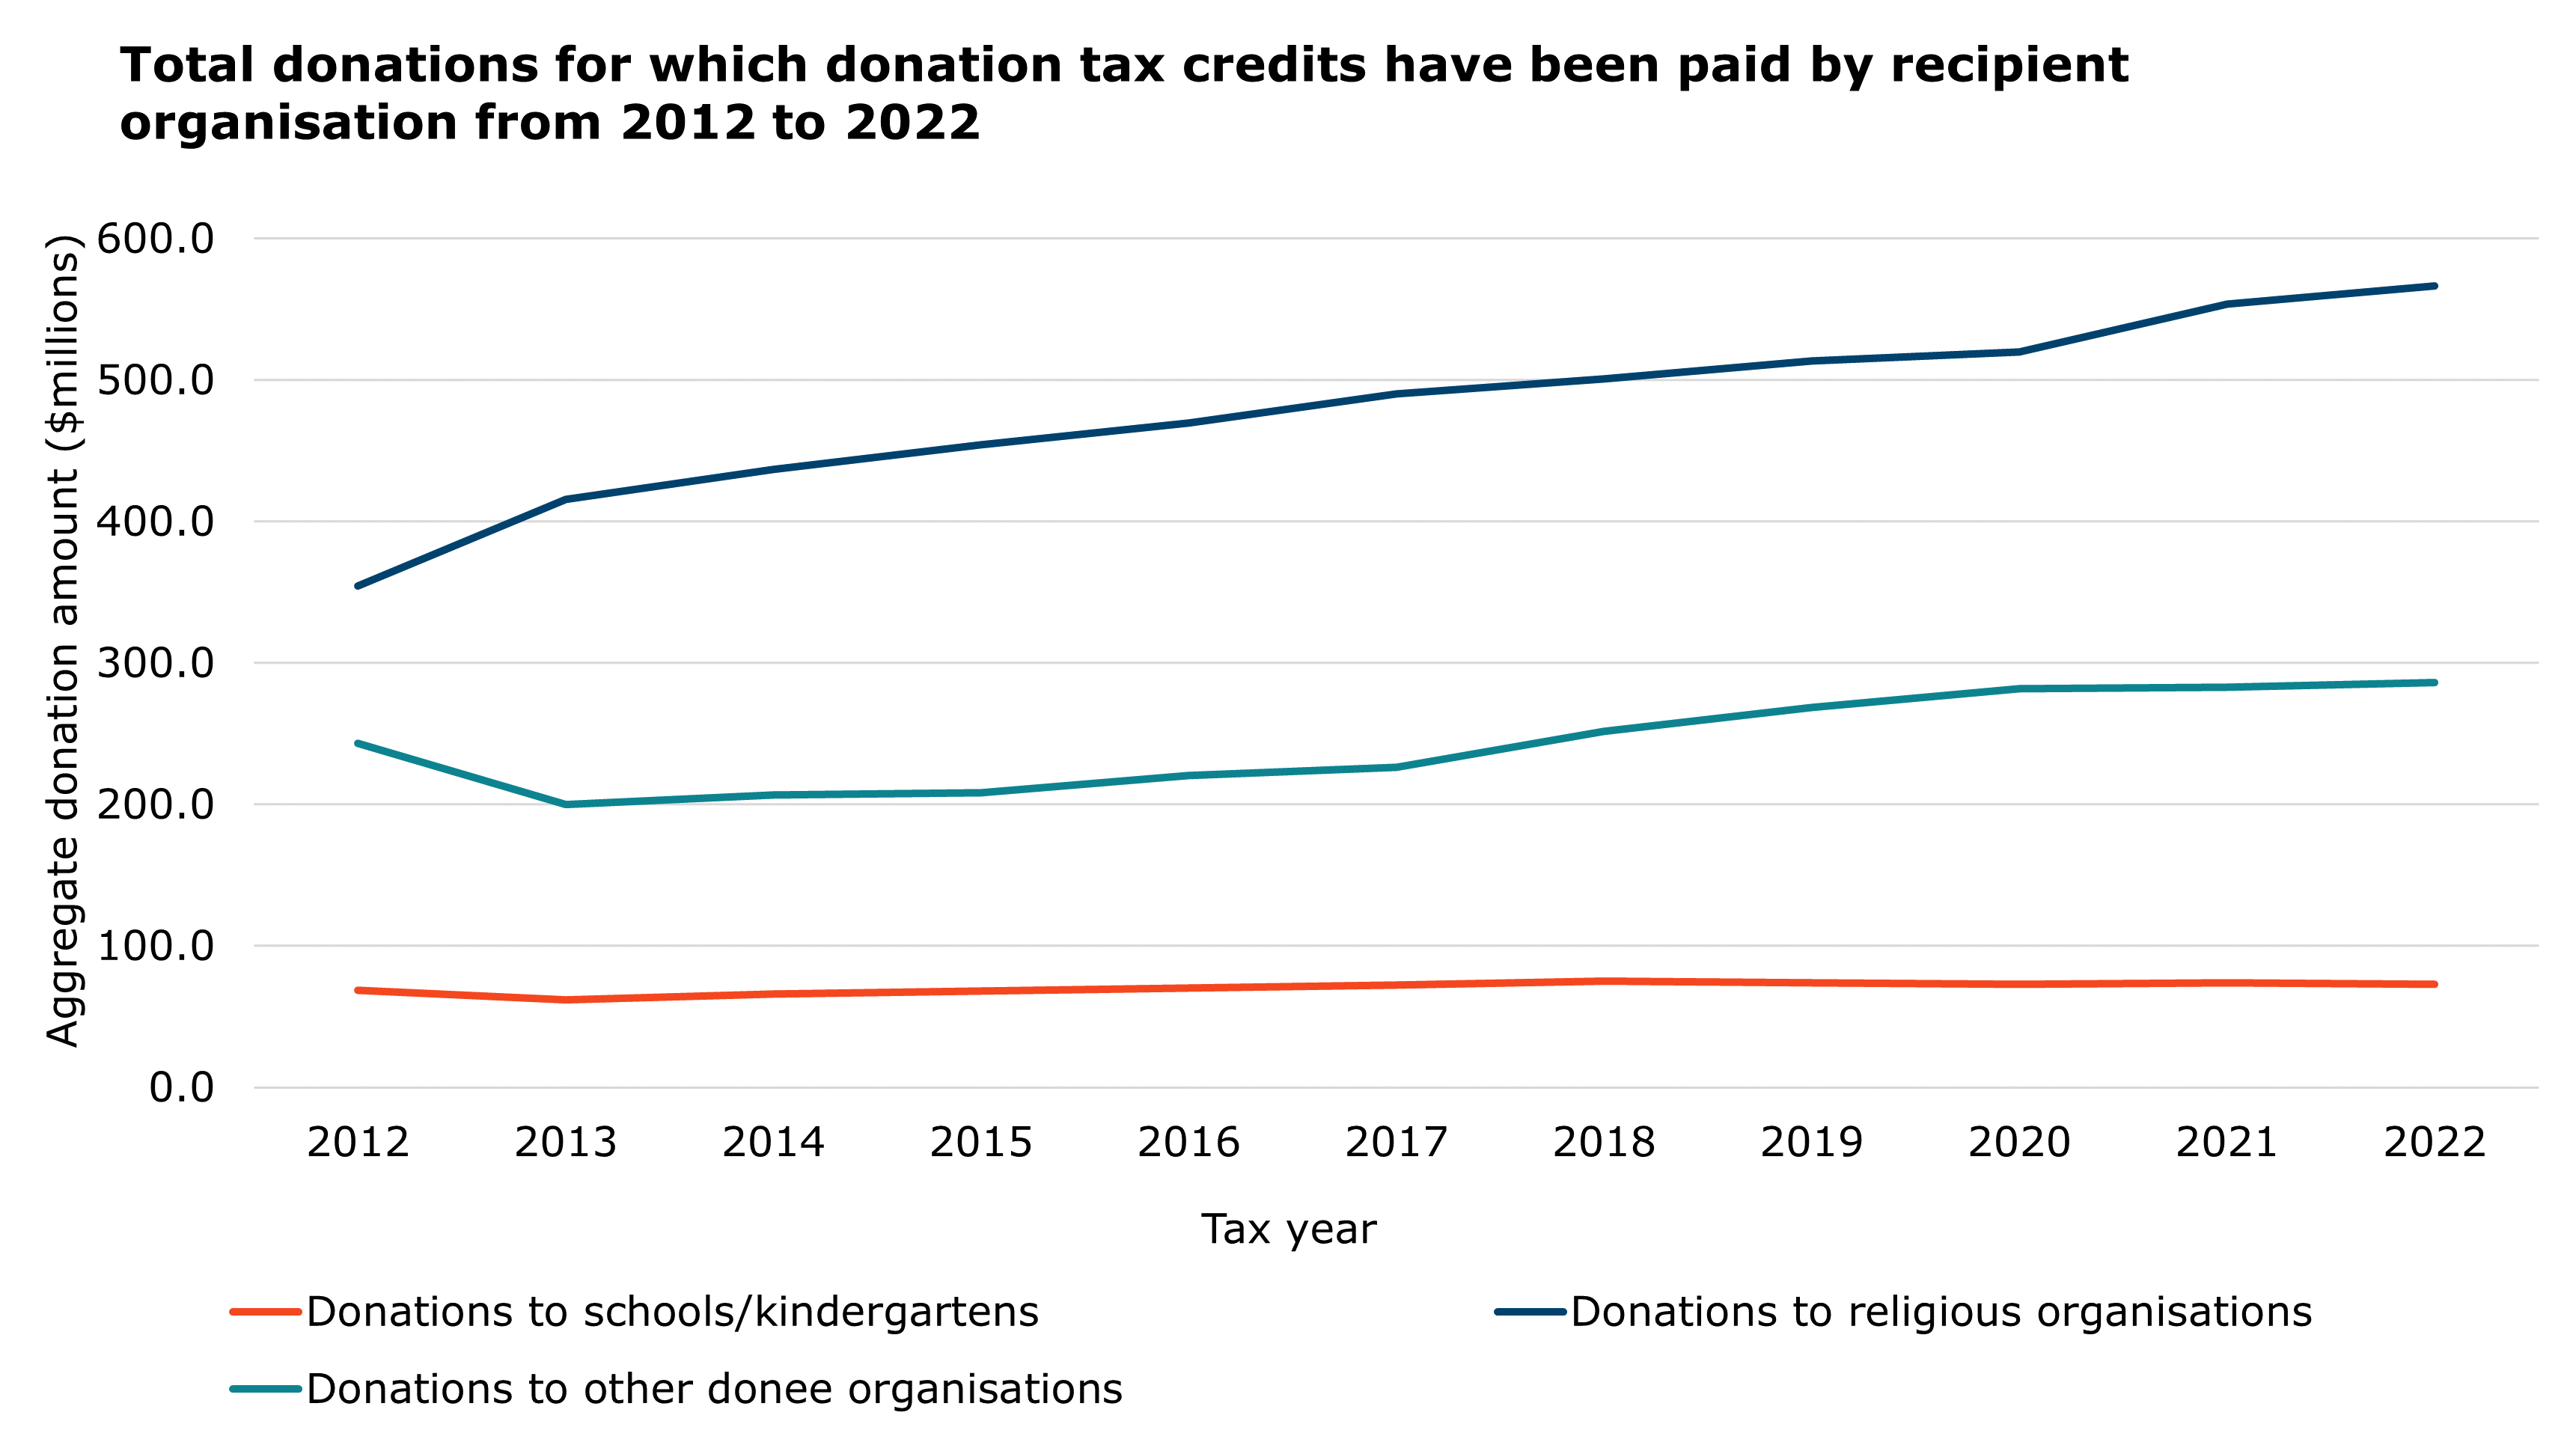 This graph has three lines that show the total donations made in millions of dollars that have had donations tax credits claimed. The graph shows changes between 2012 and 2022. Donations to schools and kindergartens increased 6% from $69 million in 2021 to $73 million in 2022. Donations made to religious organisations have increased 59% from $355 million in 2012 to $565 million in 2022. Donations to other organisations have increased 17% from $243 million in 2012 to $285 million in 2022.